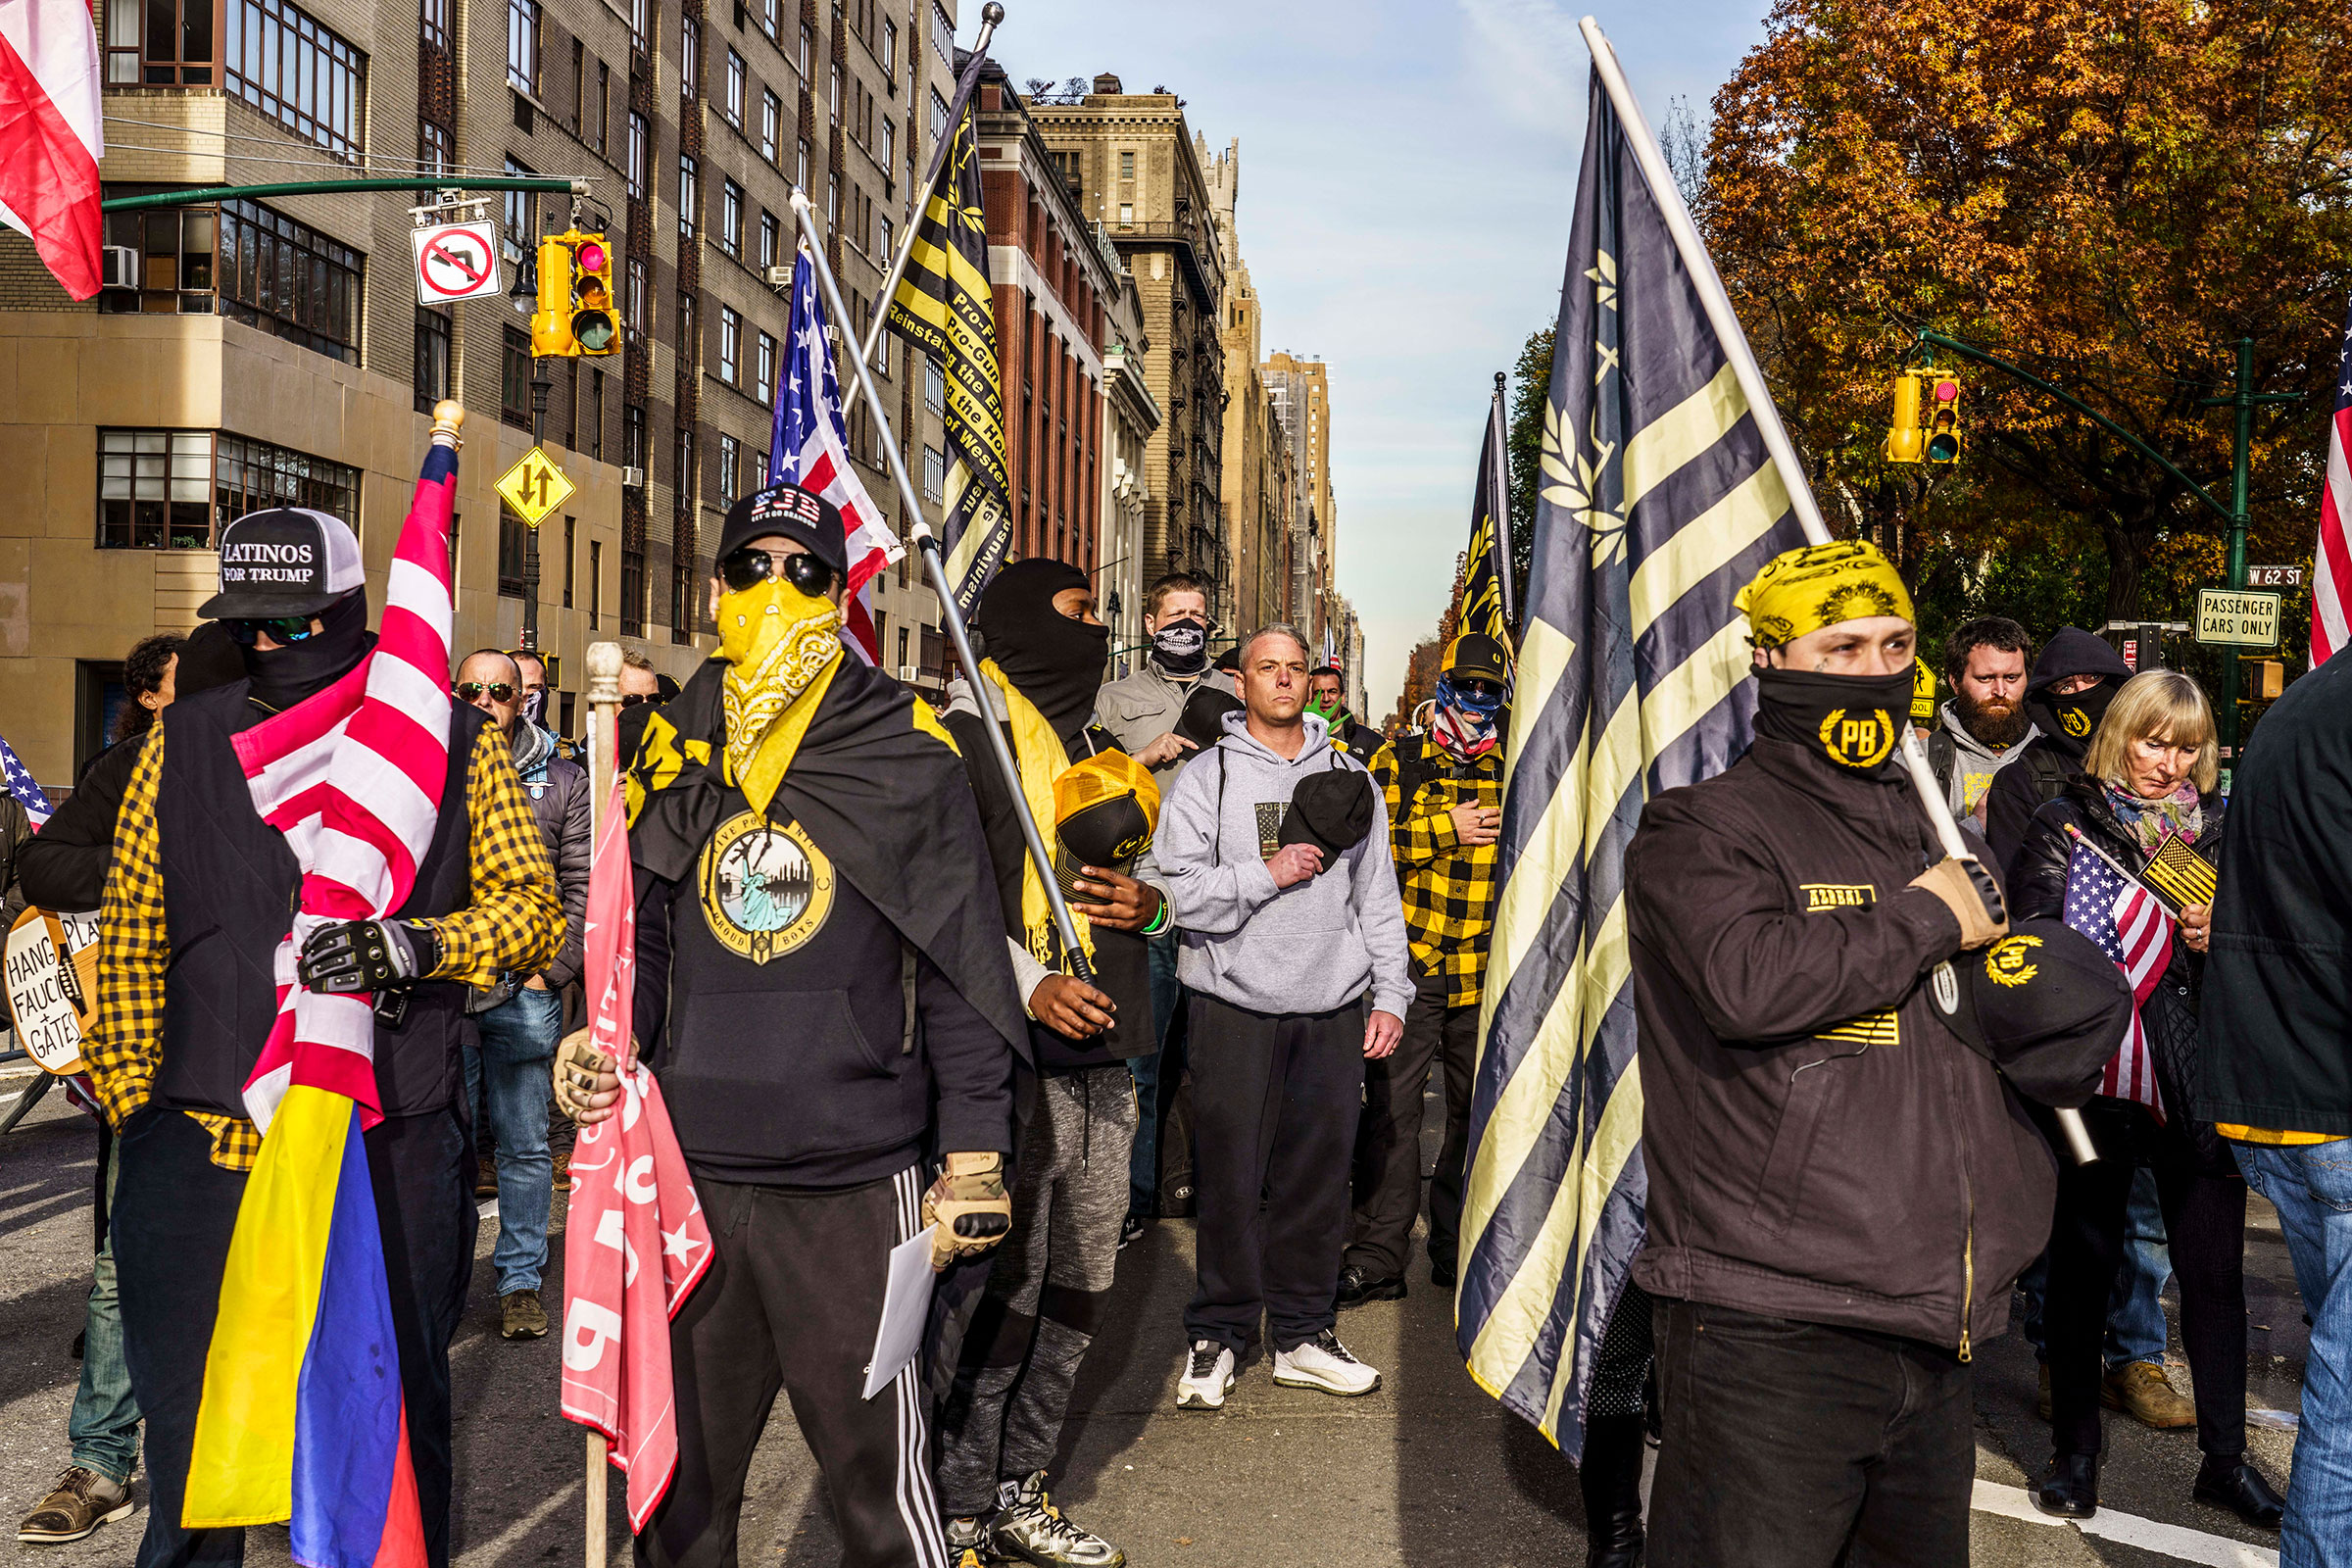 Protestors, including members of the Proud Boys, rally against COVID-19 vaccinations and mandates in New York City, on Nov. 20, 2021. (Mark Peterson—Redux)